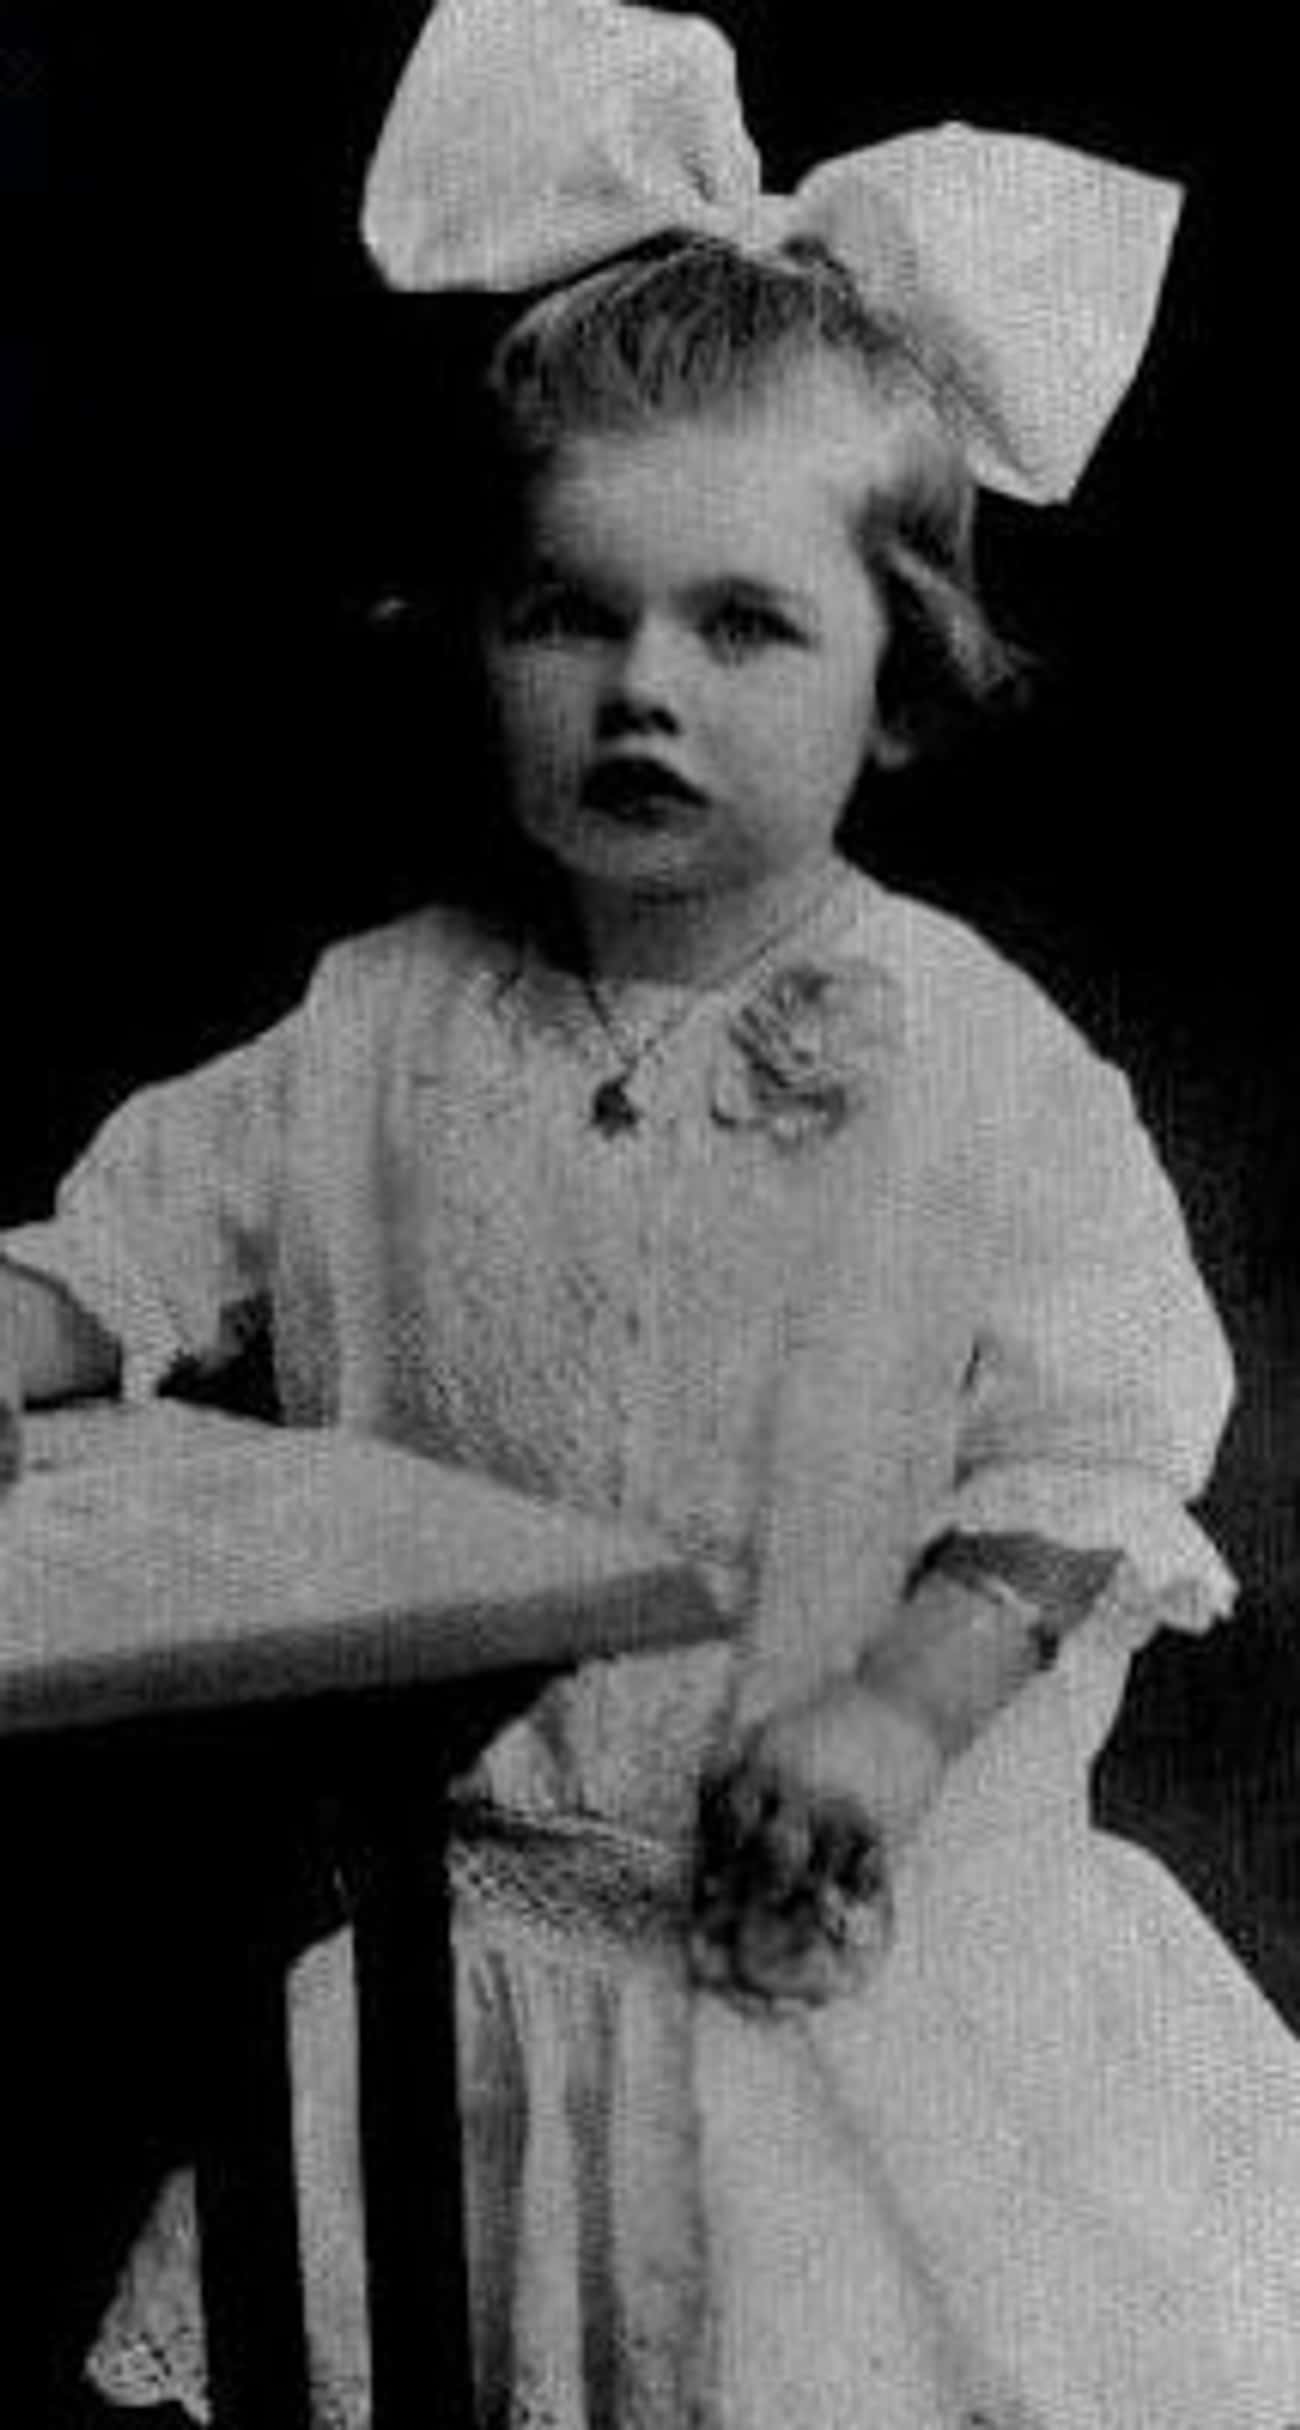 Young Lucille Ball as a Baby